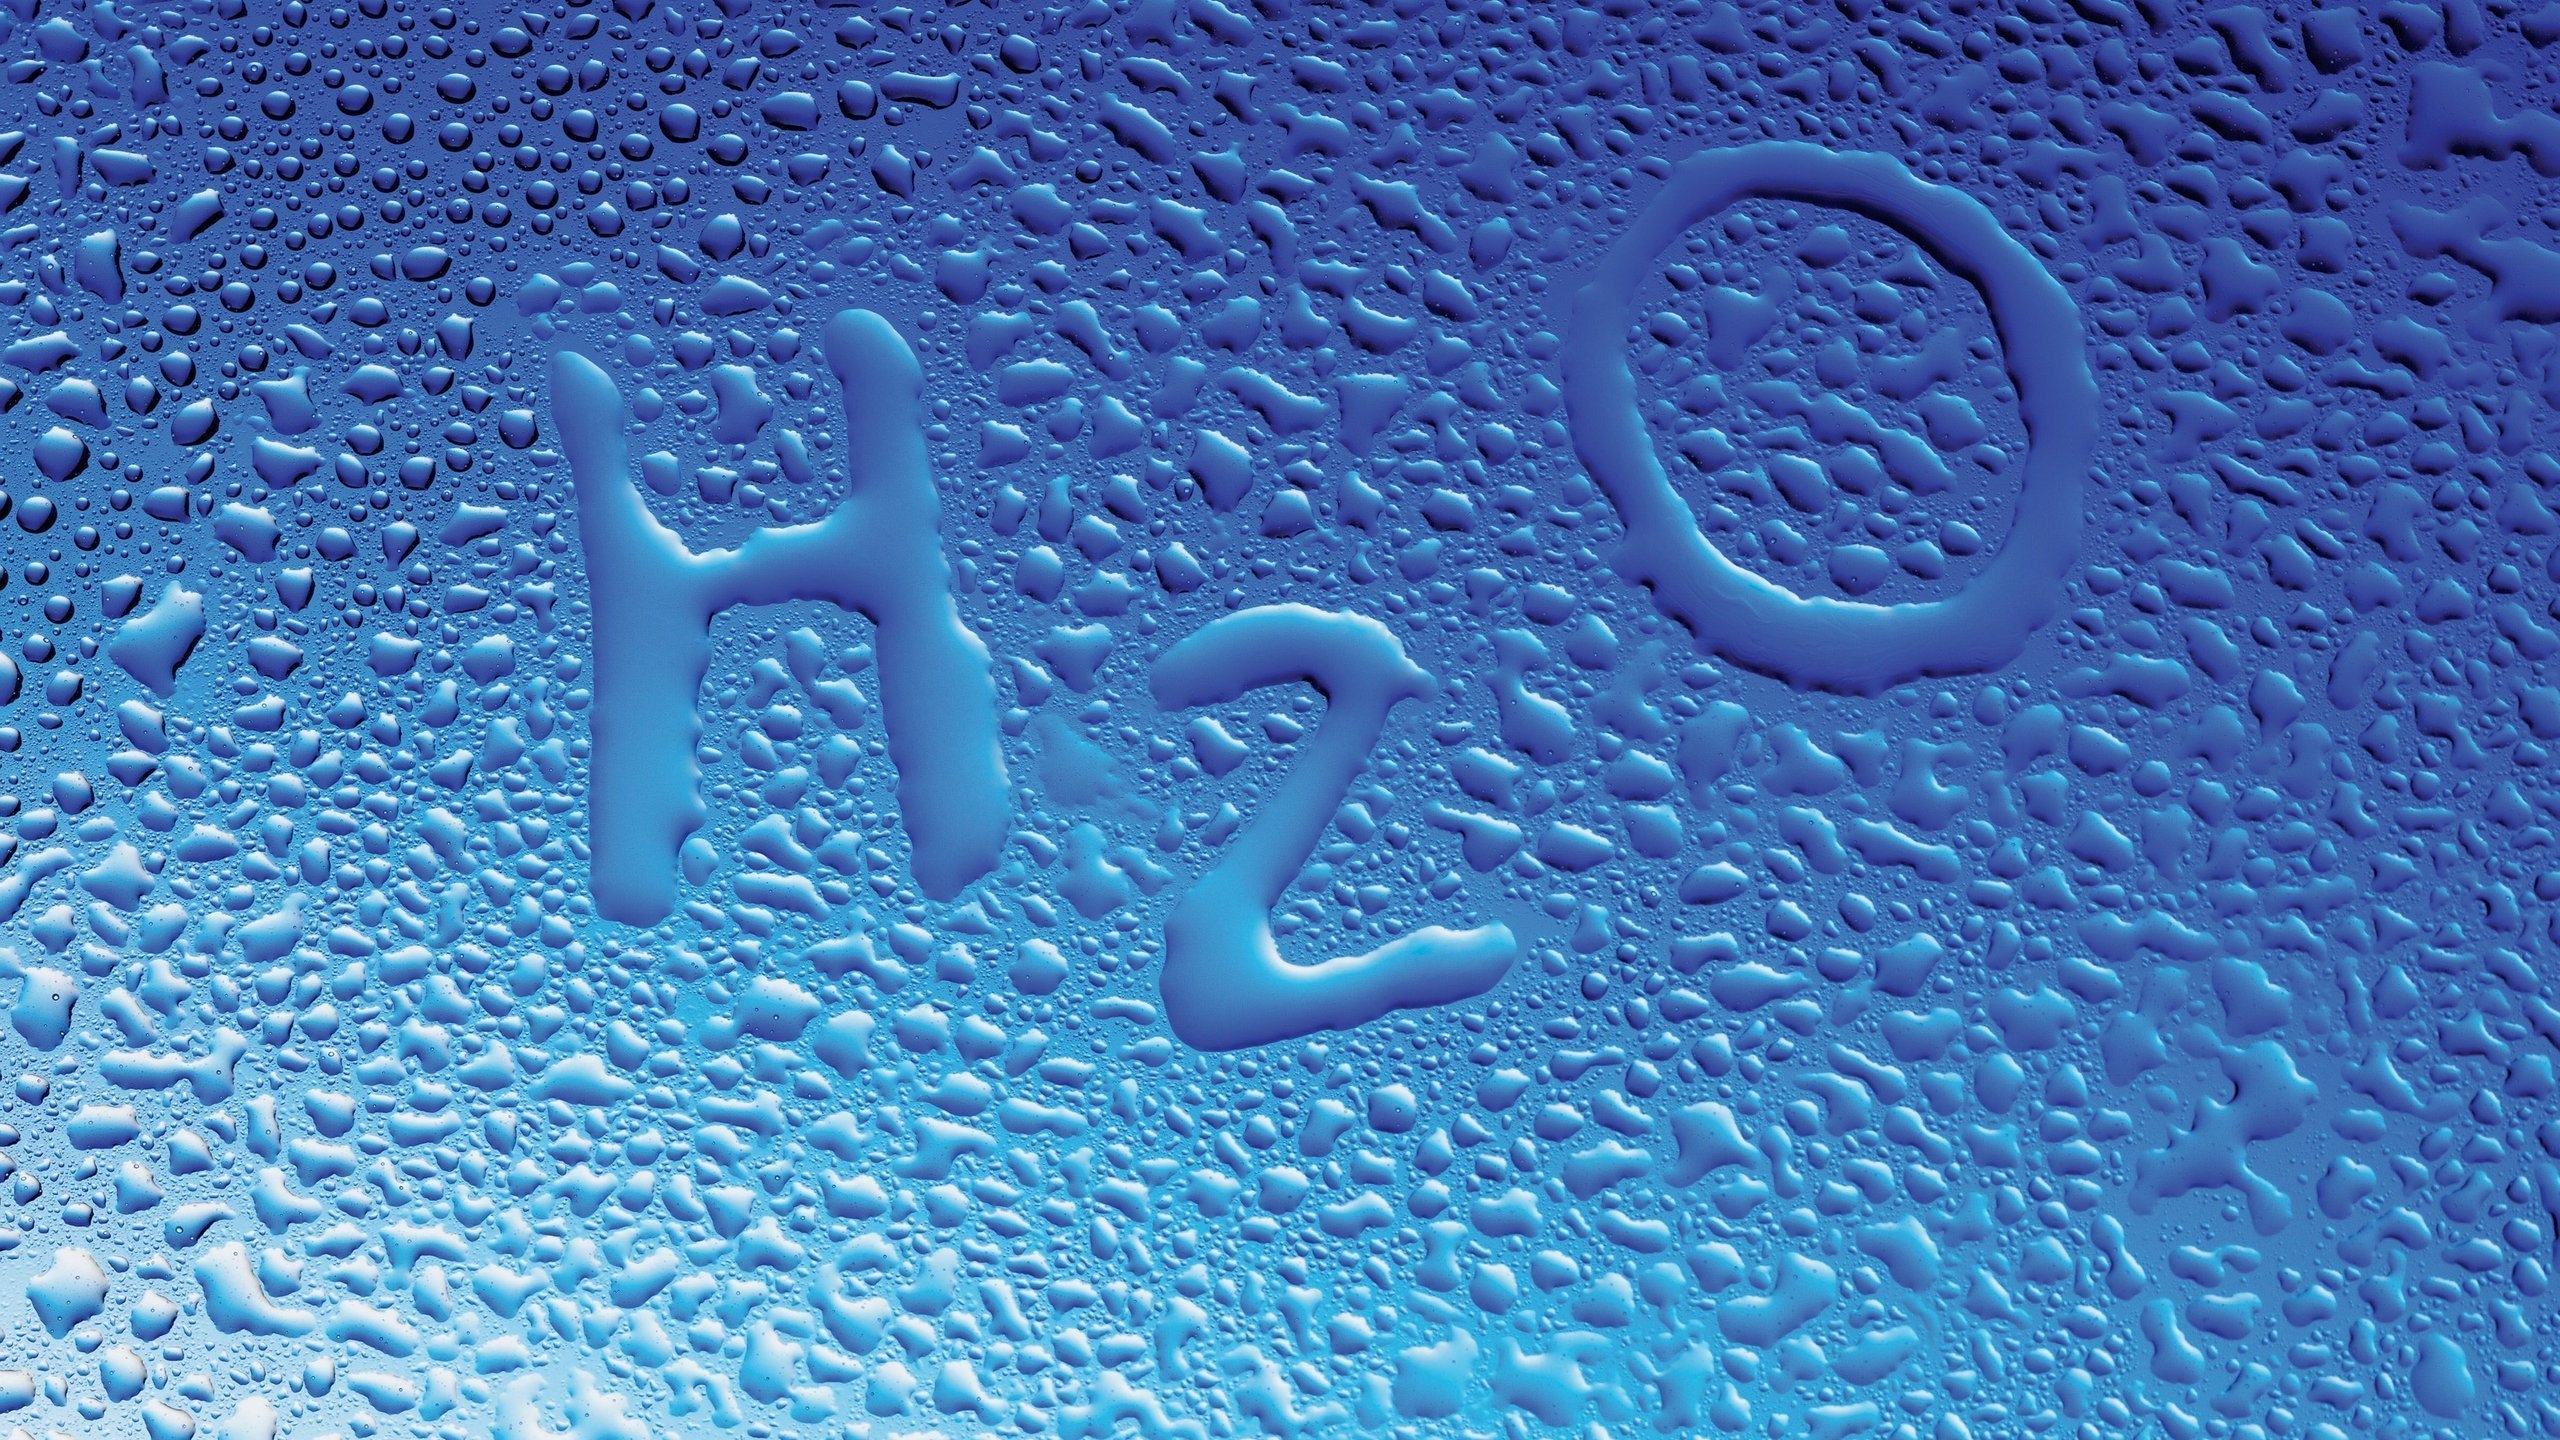 H2O Water for 2560x1440 HDTV resolution